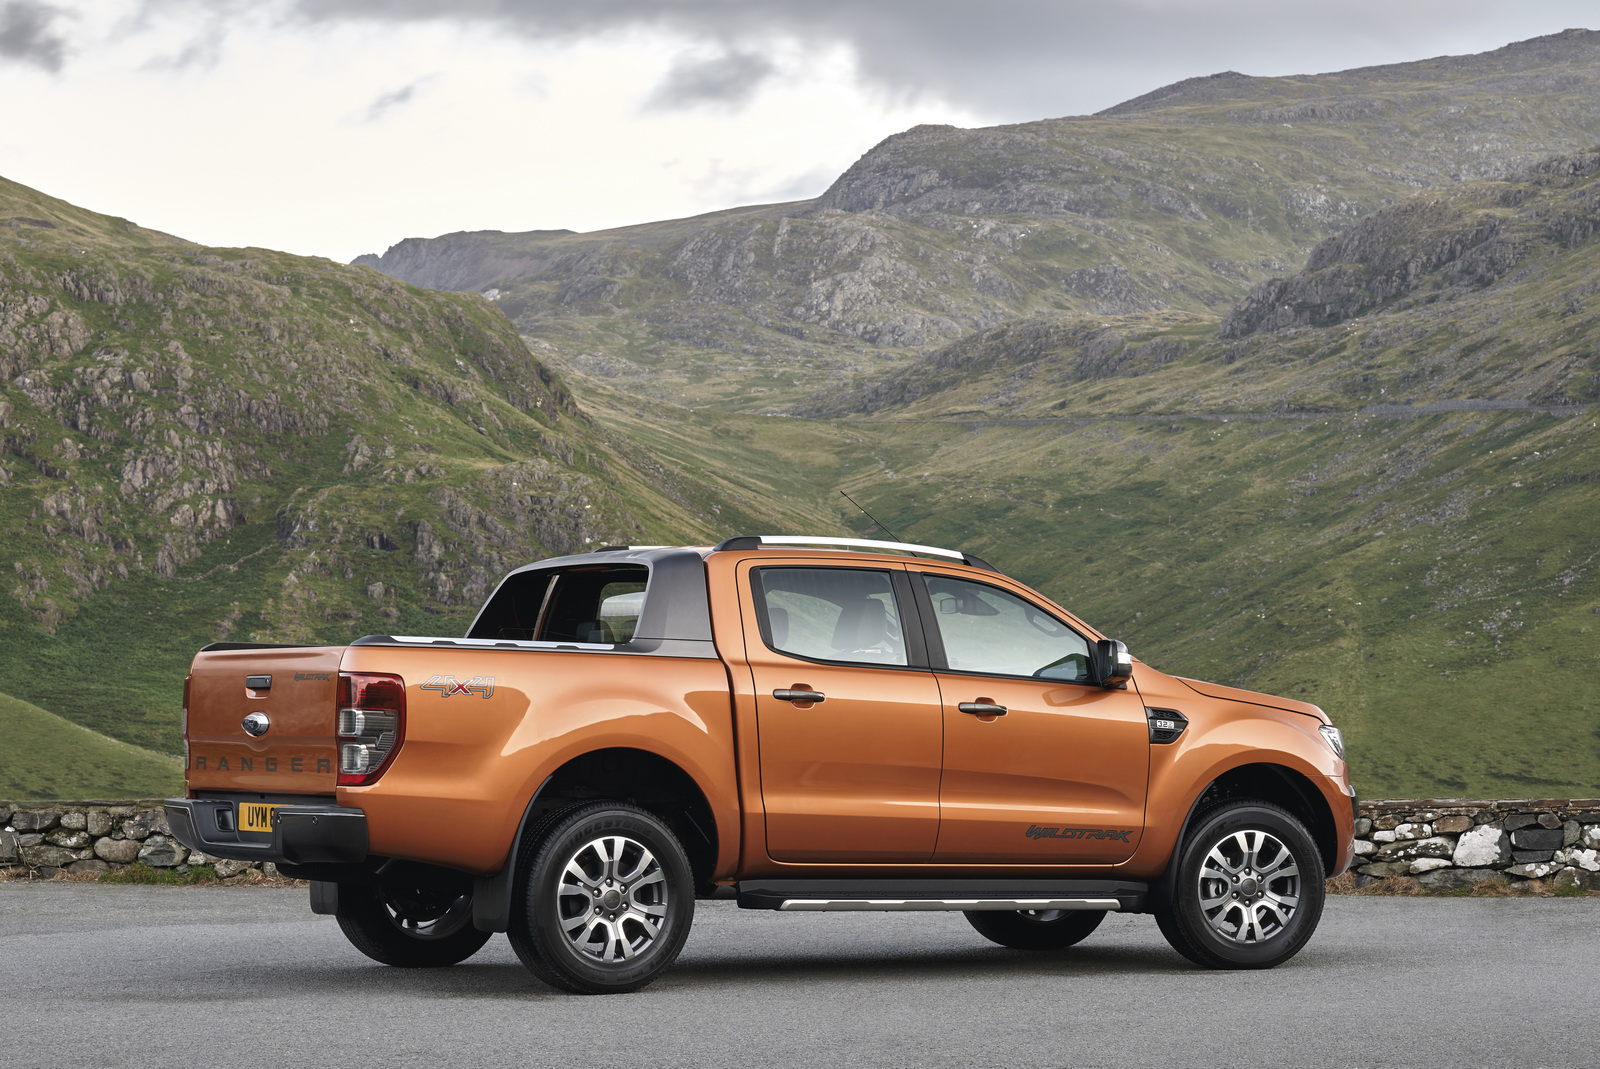 Nice Images Collection: Ford Ranger Desktop Wallpapers